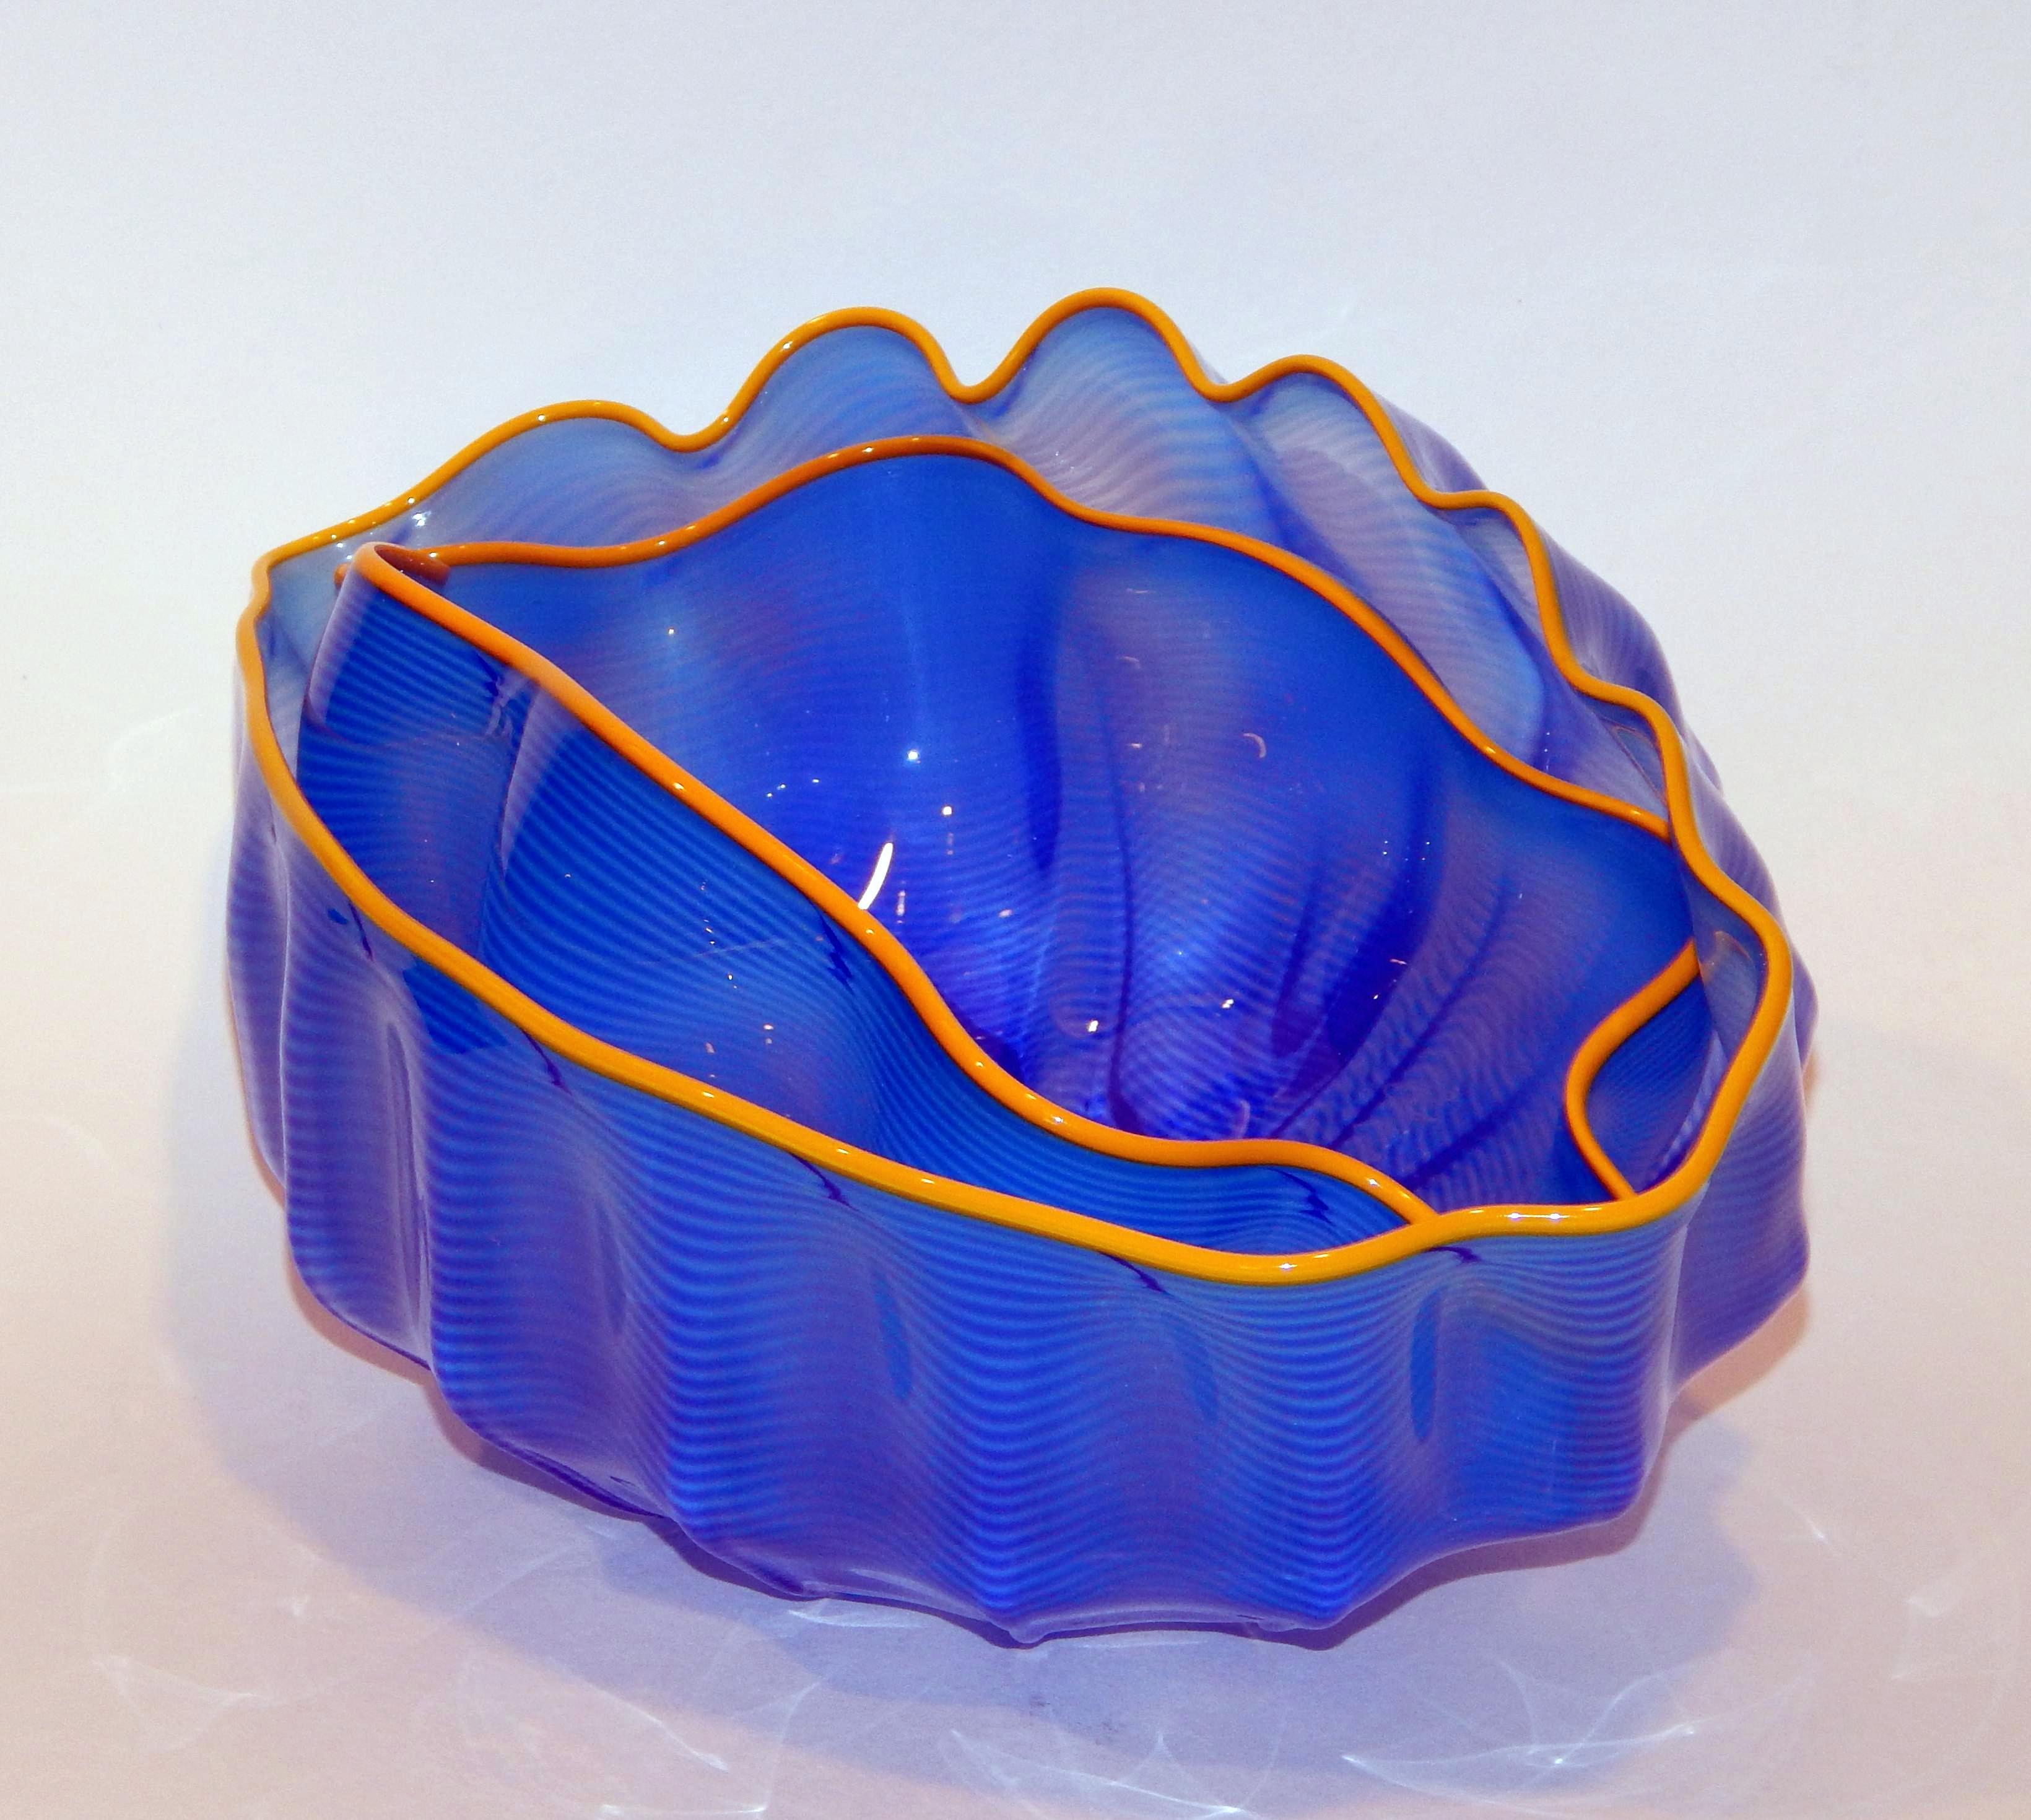 Beautiful, two-piece glass table sculpture by Dale Chihuly, circa 2000.
In excellent condition. Blue with a bright yellow rim.
Signed Chihuly.
Larger bowl measures: 5.625